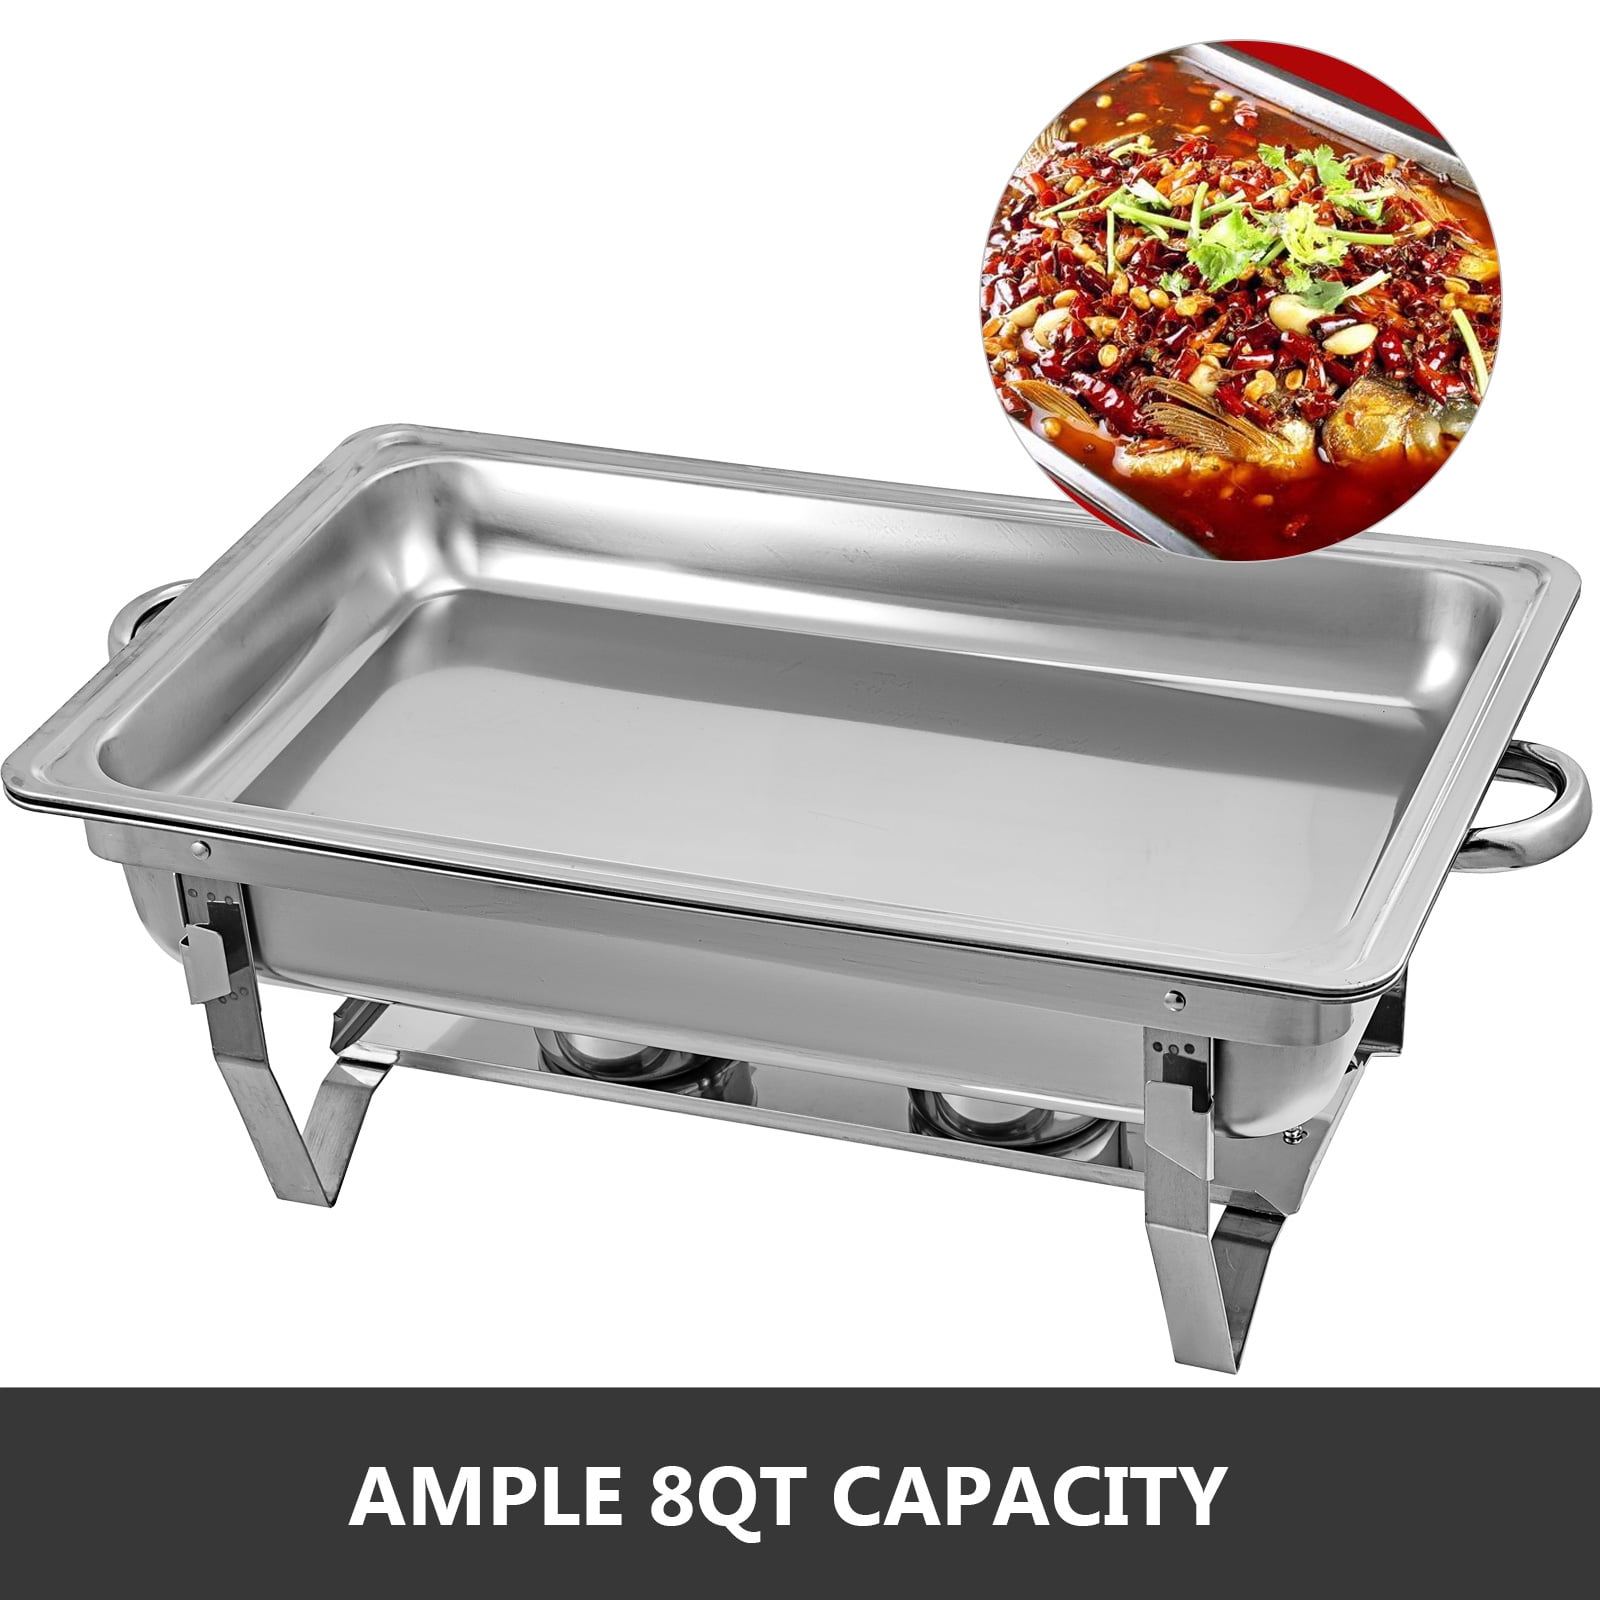 VEVOR 2 Packs Chafing Dish 8 Quart Stainless Steel Chafer Dishes Full Size Rectangular Chafers for Catering Buffet Warmer Set with Folding Frame 